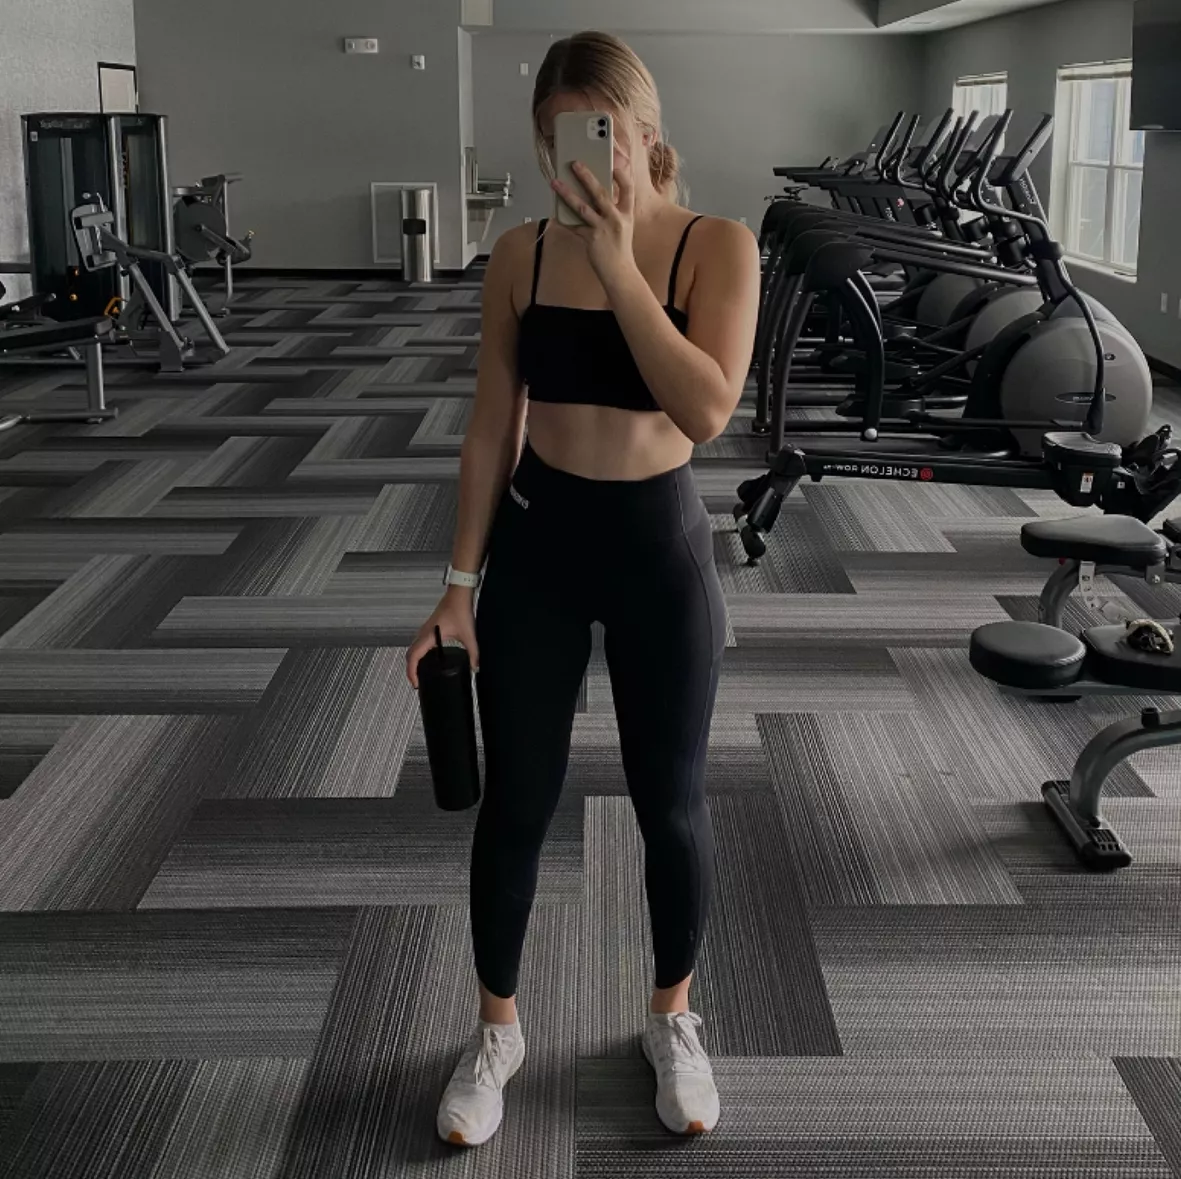 The Gymshark Fit Leggings are a simple design available in stylish